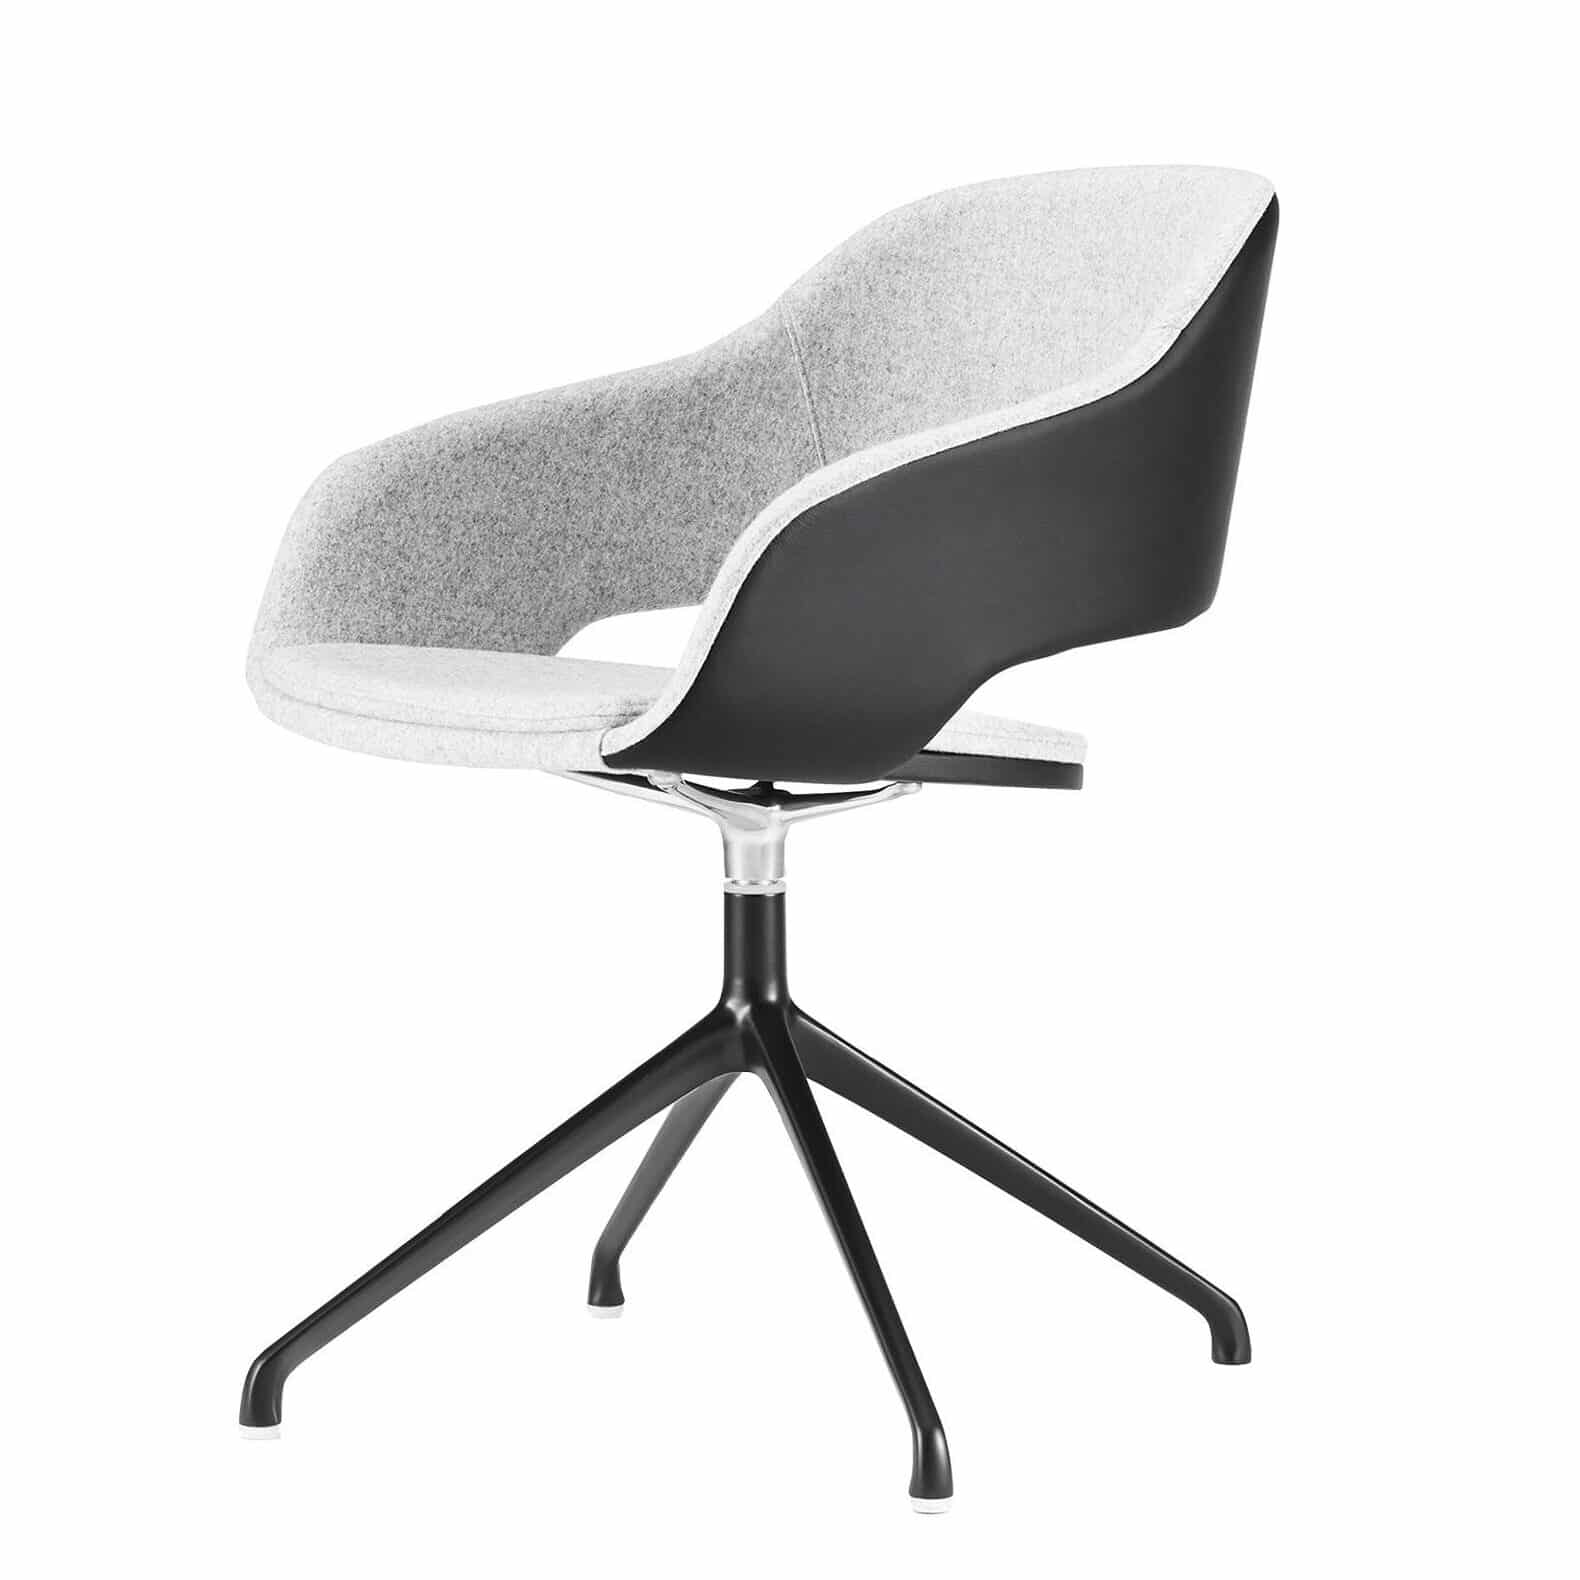 The Source Martini chair is a blend of sophisticated design, environmental responsibility, and realistic pricing.